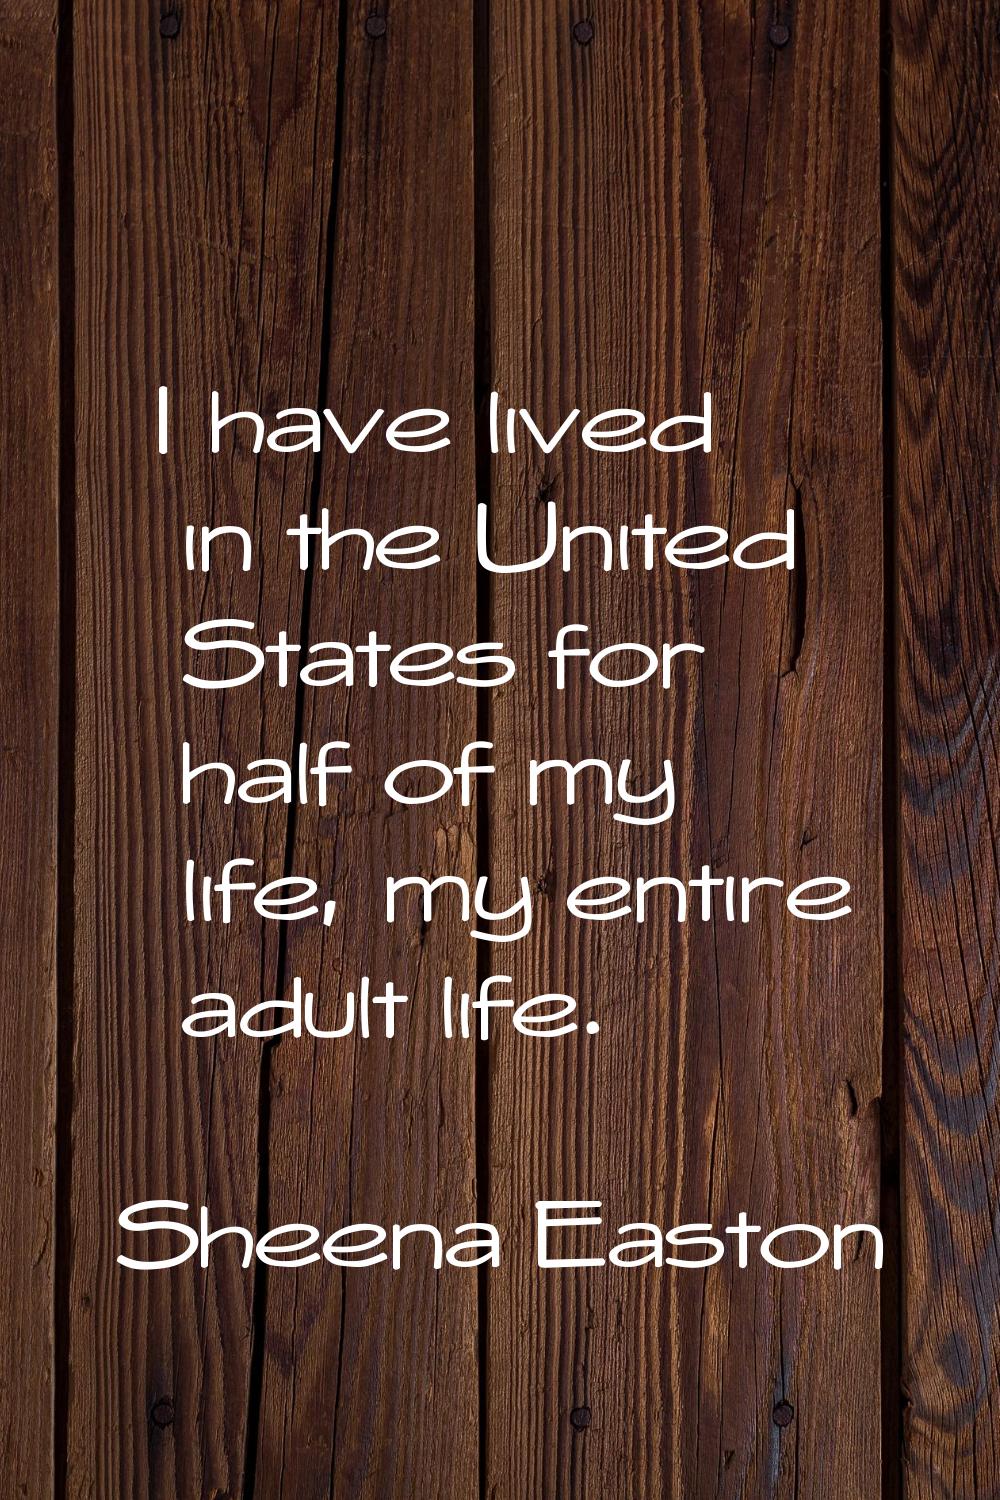 I have lived in the United States for half of my life, my entire adult life.